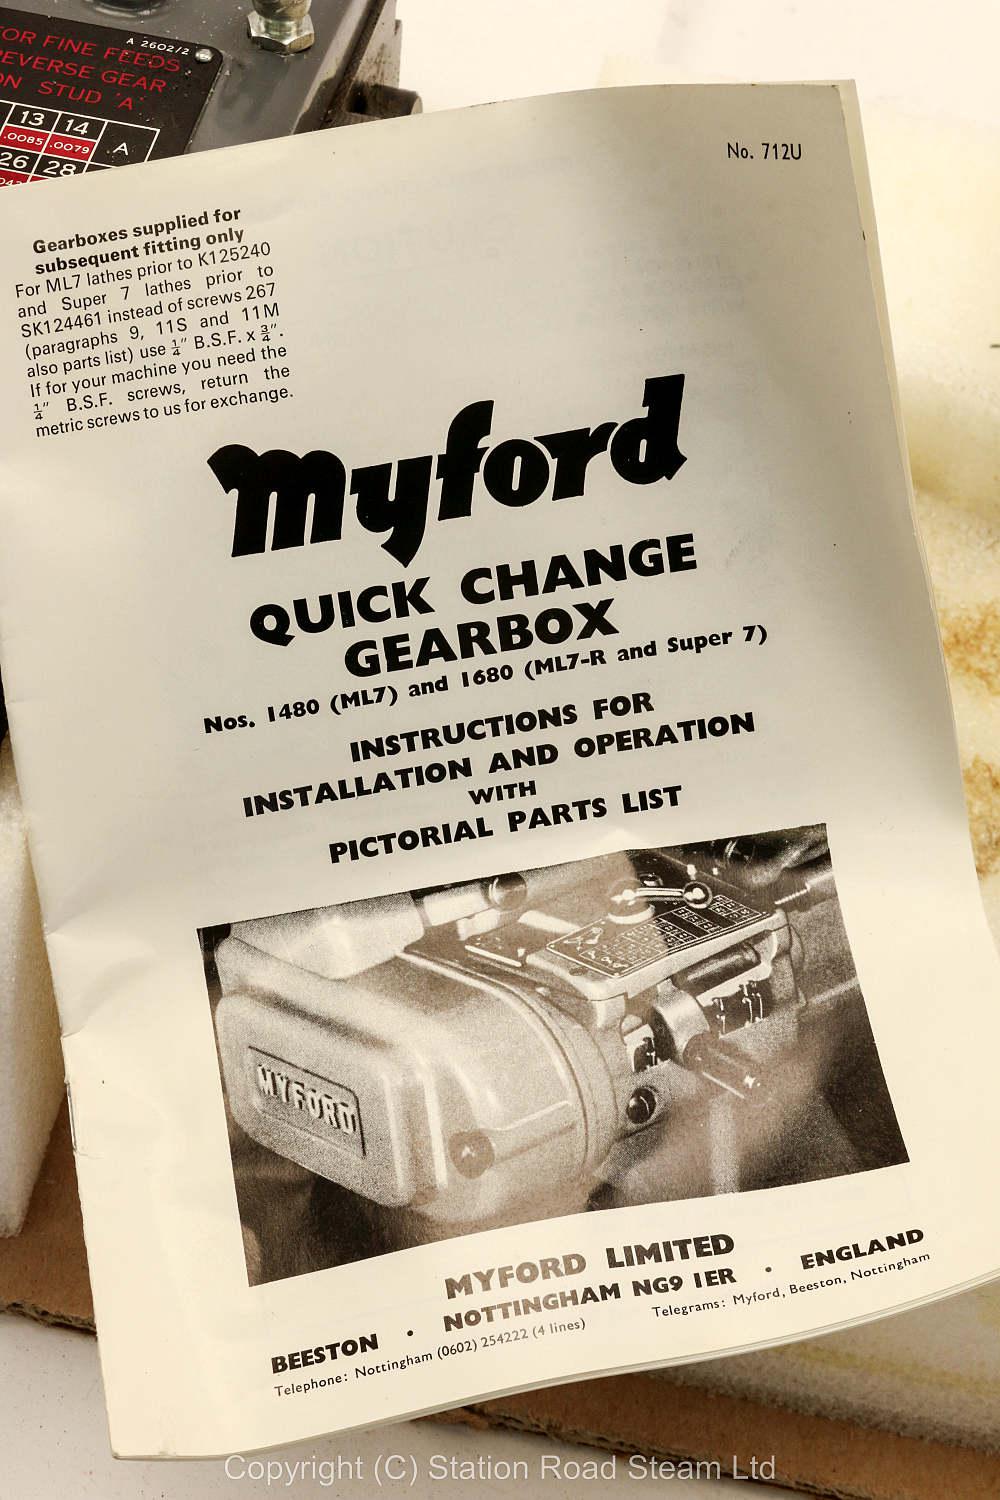 New, boxed Myford quick change gearbox